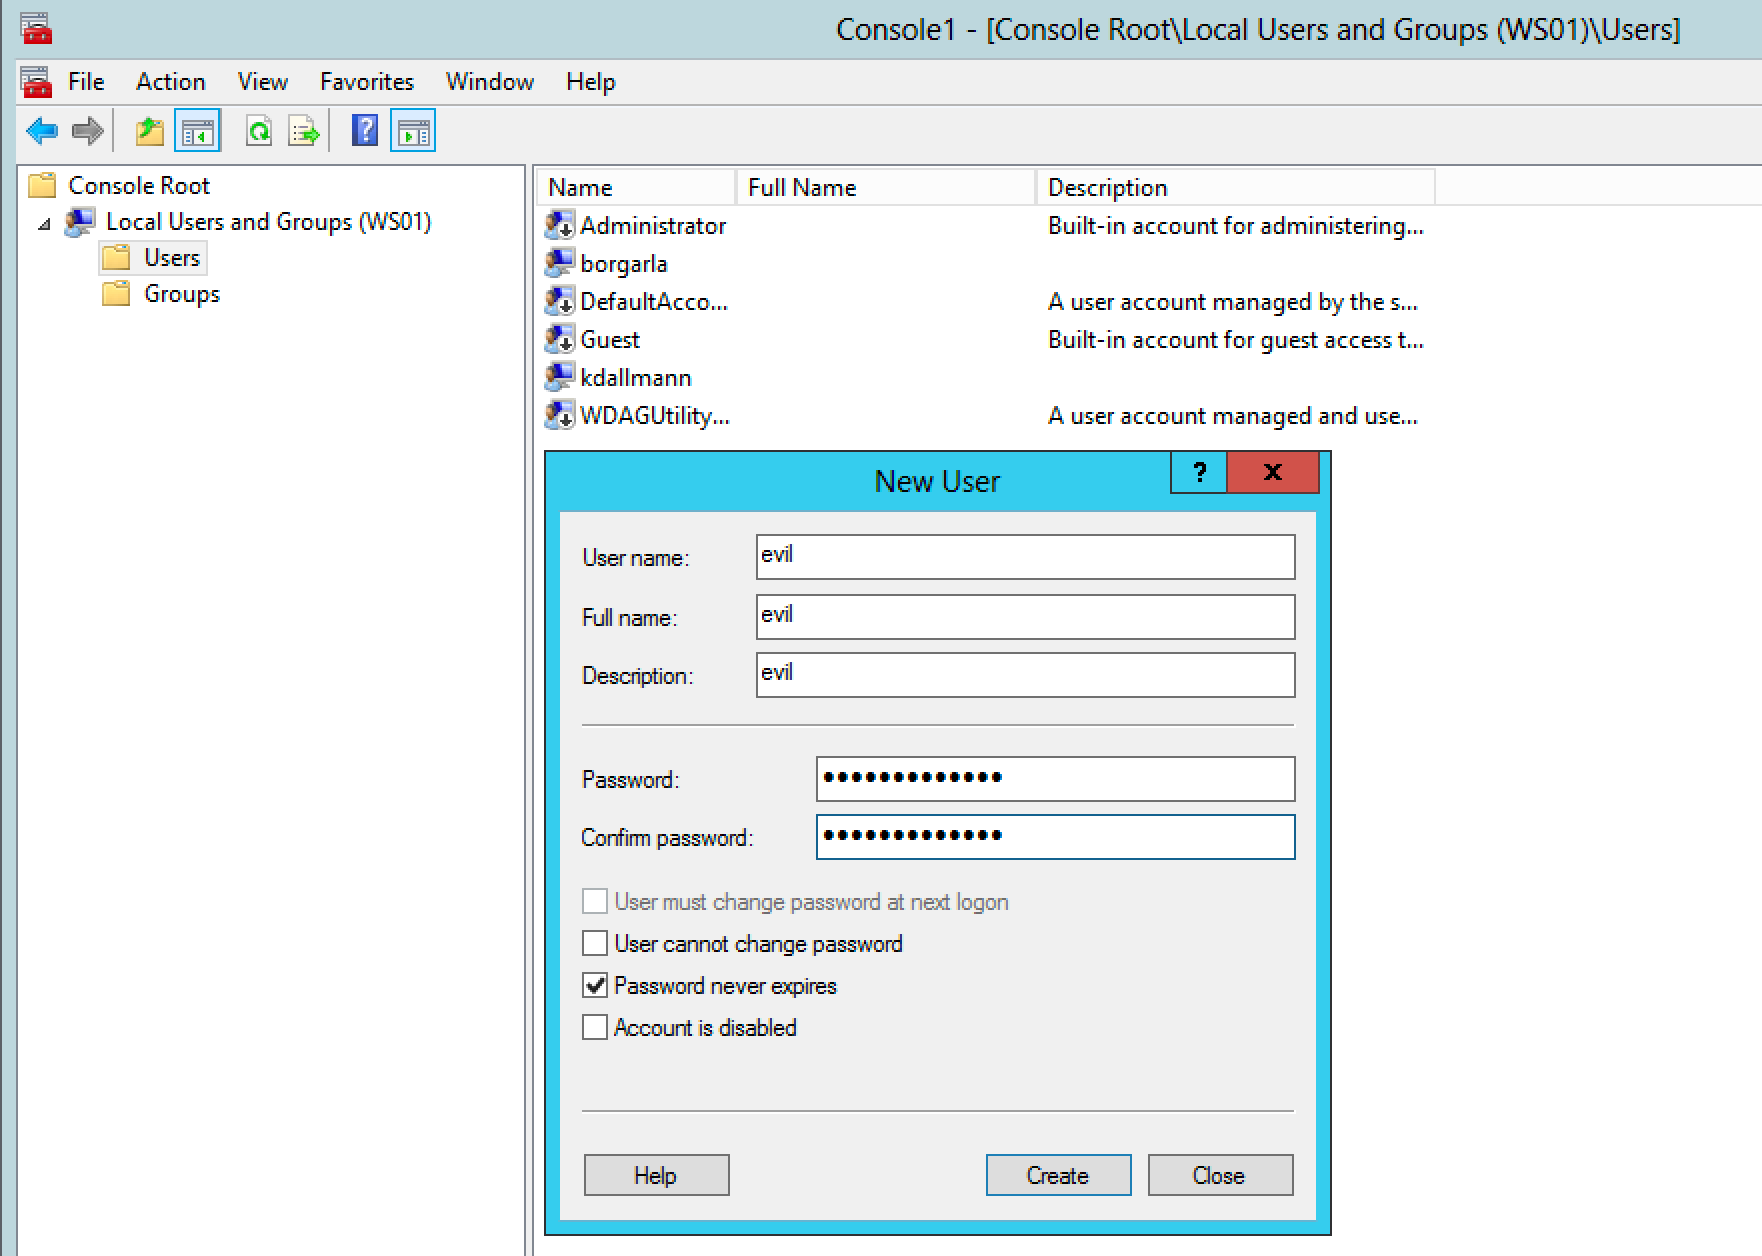 Using mmc.exe to create a new local admin on the remote host